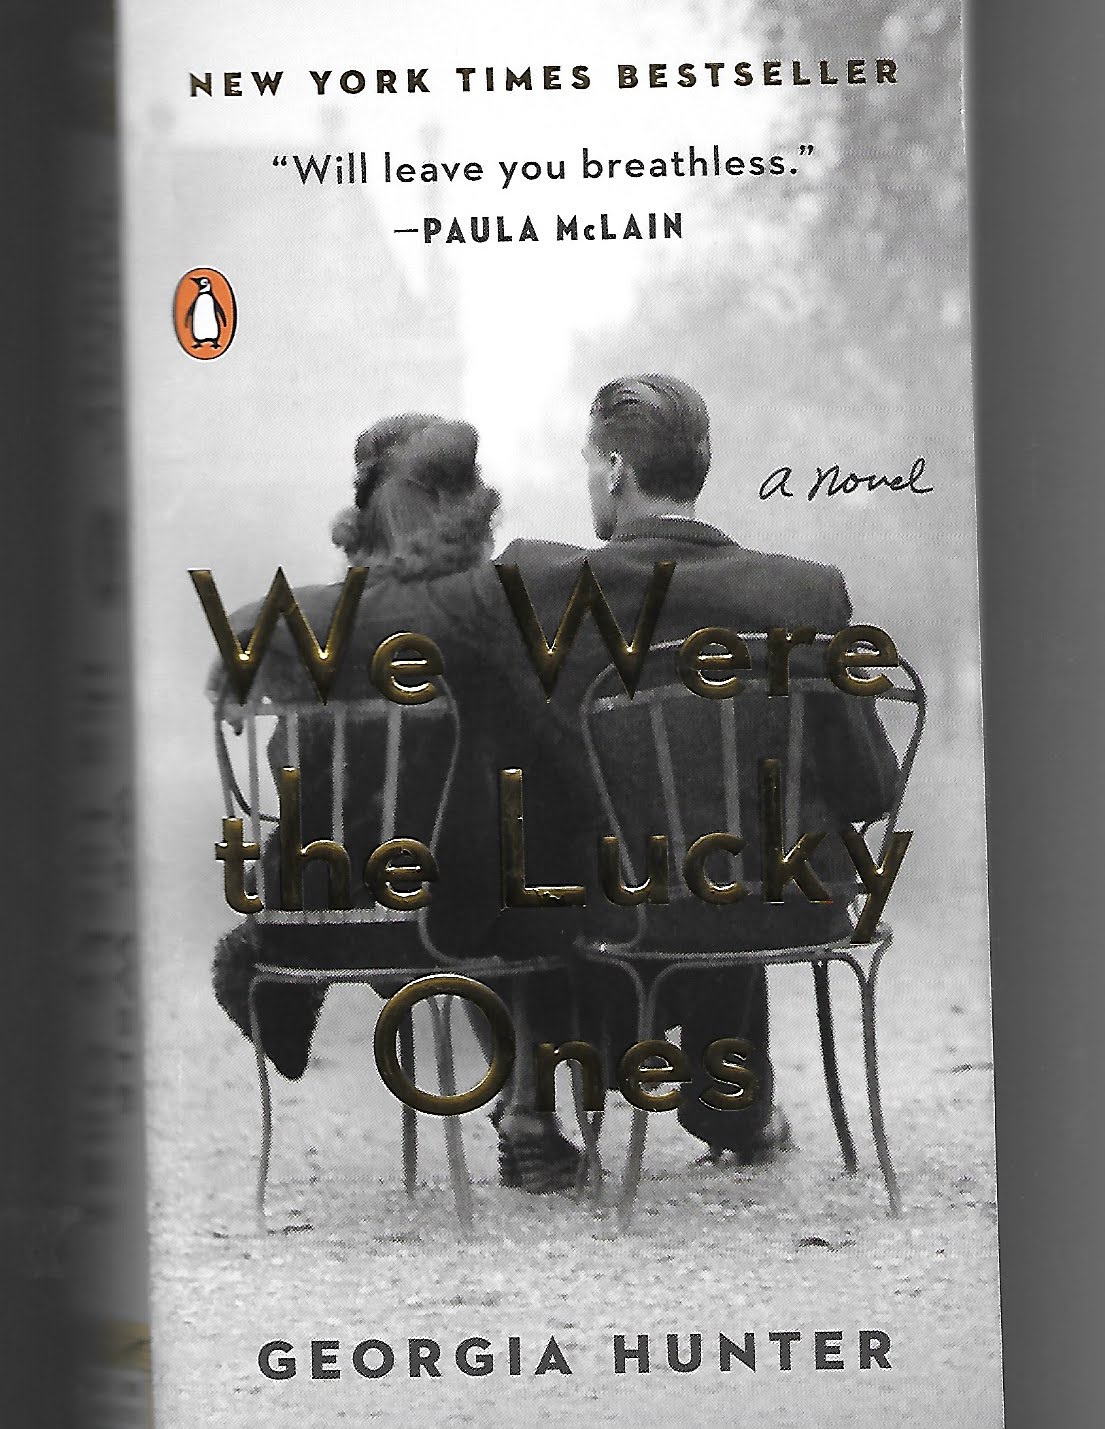 book review we were the lucky ones